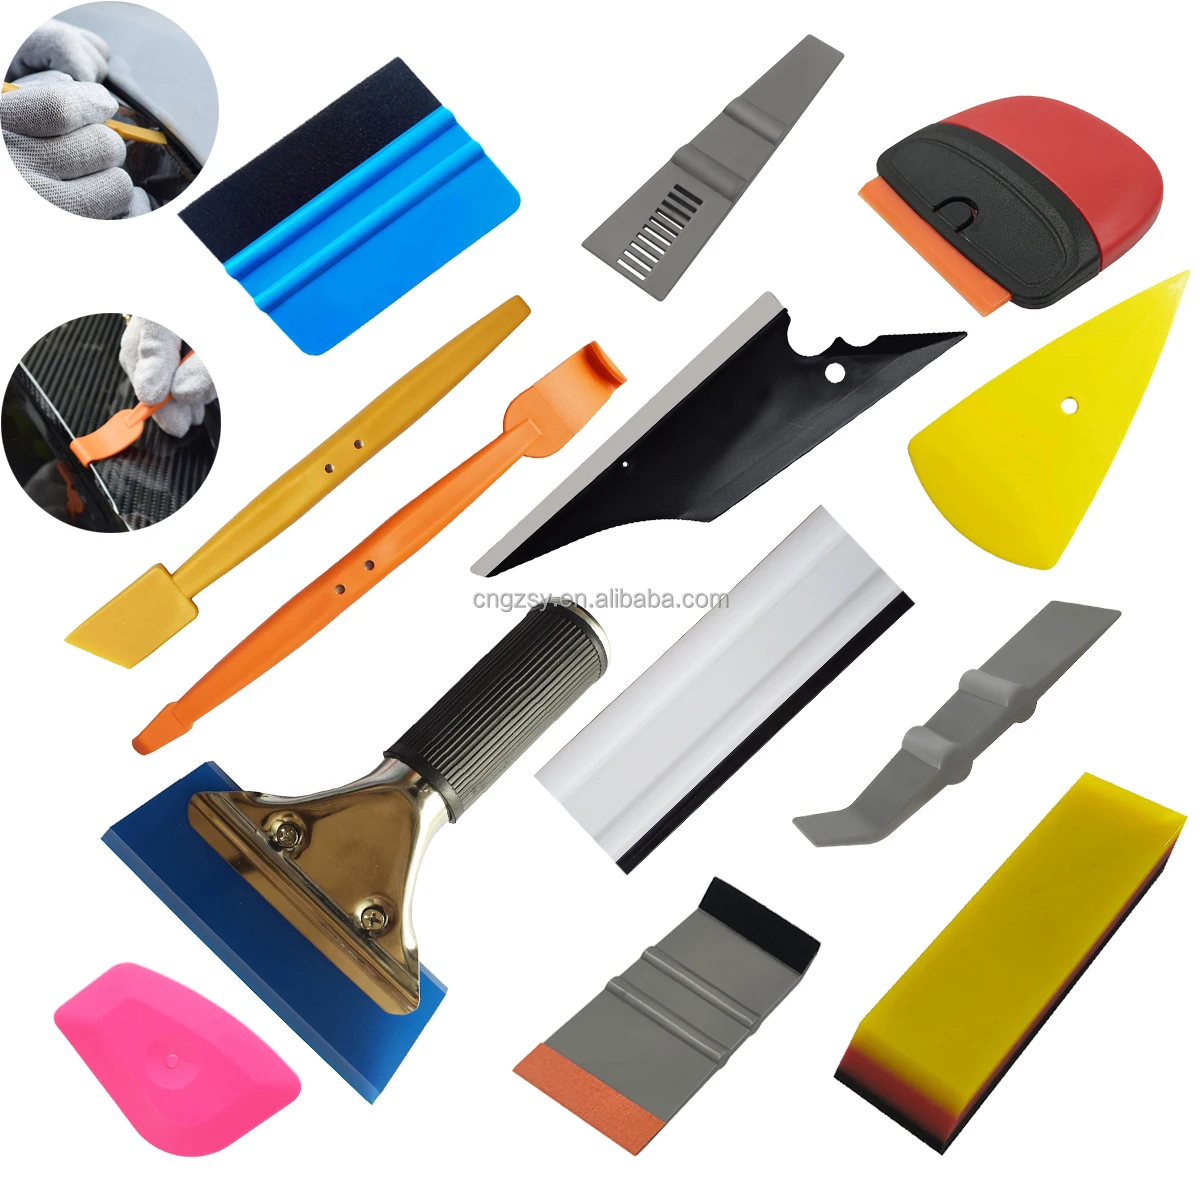 5 in 1 Squeegee Tint Tool Set